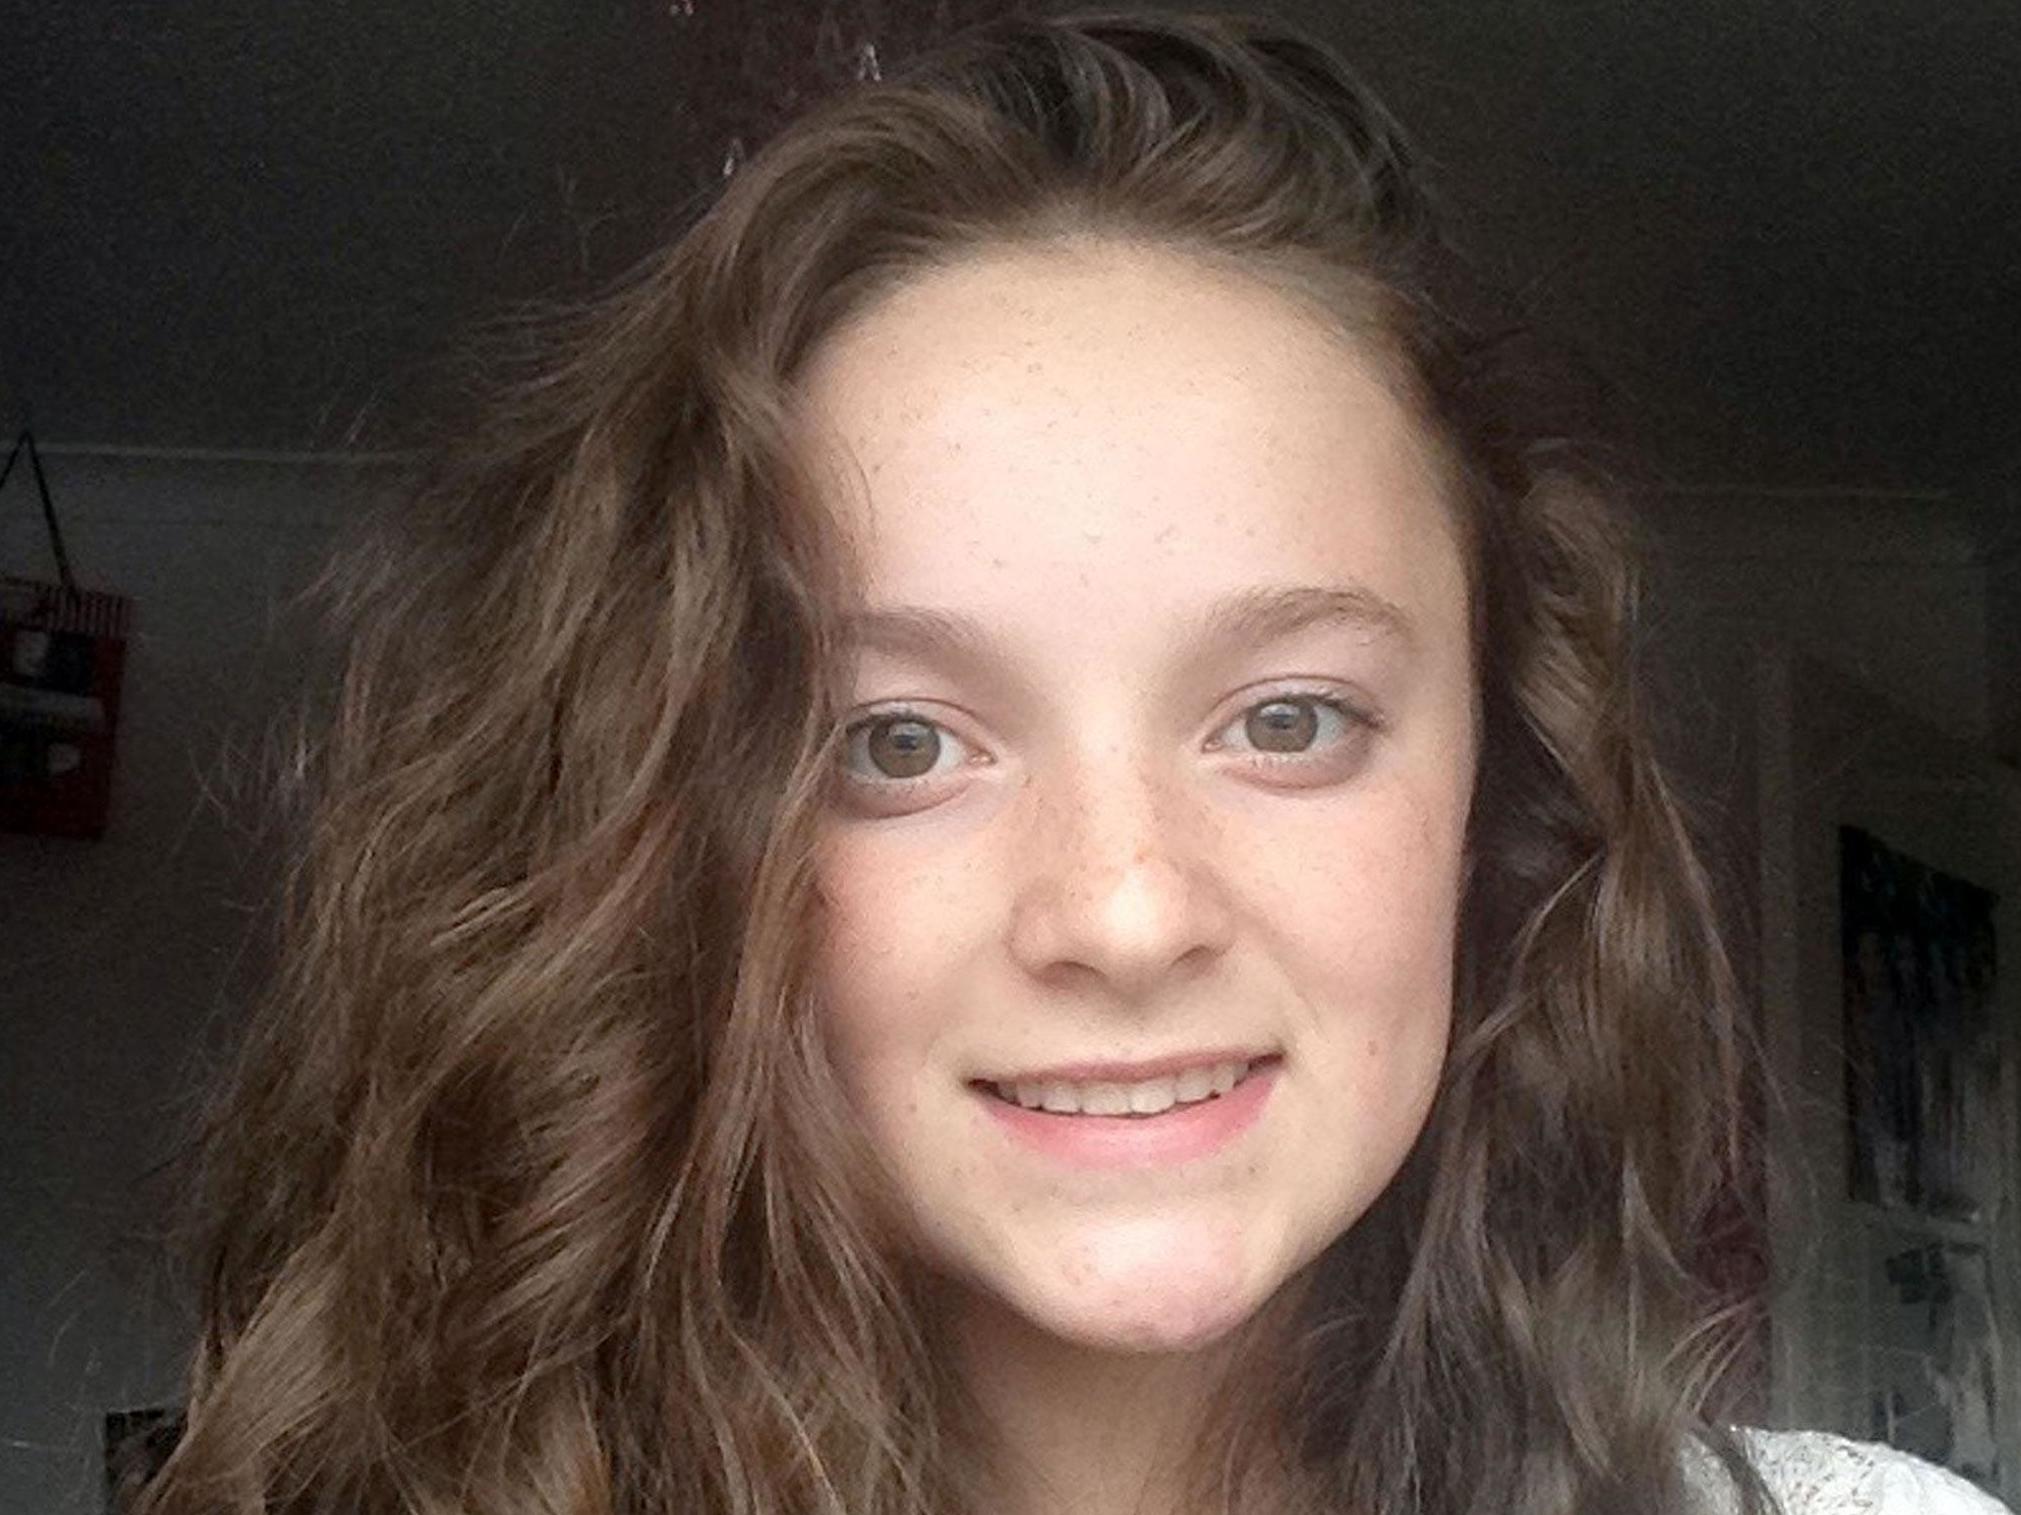 15-year-old Megan Lee died on New Year's Day. She is understood to have suffered an allergic reaction to a takeaway